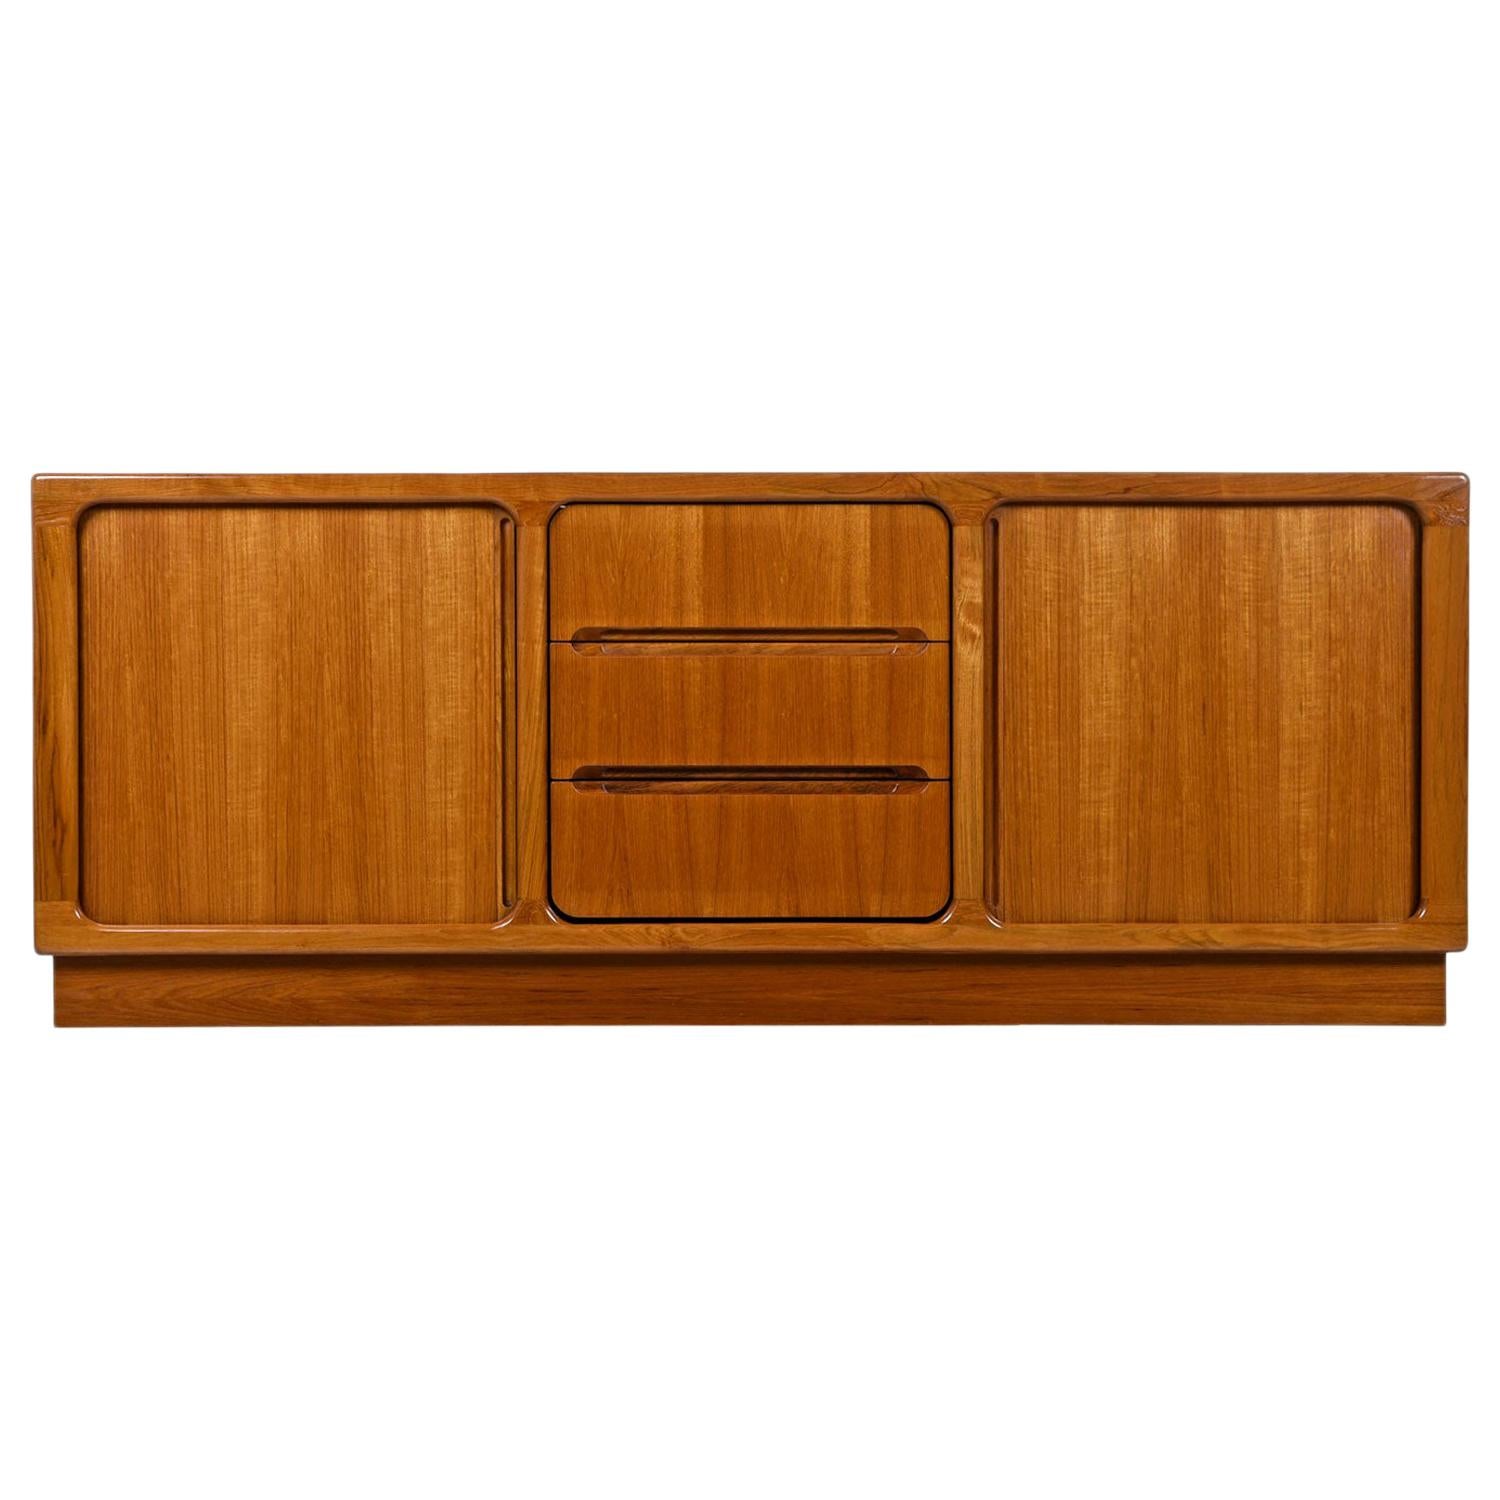 Gorgeous Scandinavian Modern teak tambour media cabinet by Sun Cabinet. Beautifully crafted and remarkable are the two individual tambour doors with thin bands of teak so finely assembled that the doors appear to be one solid sheet of teak. This